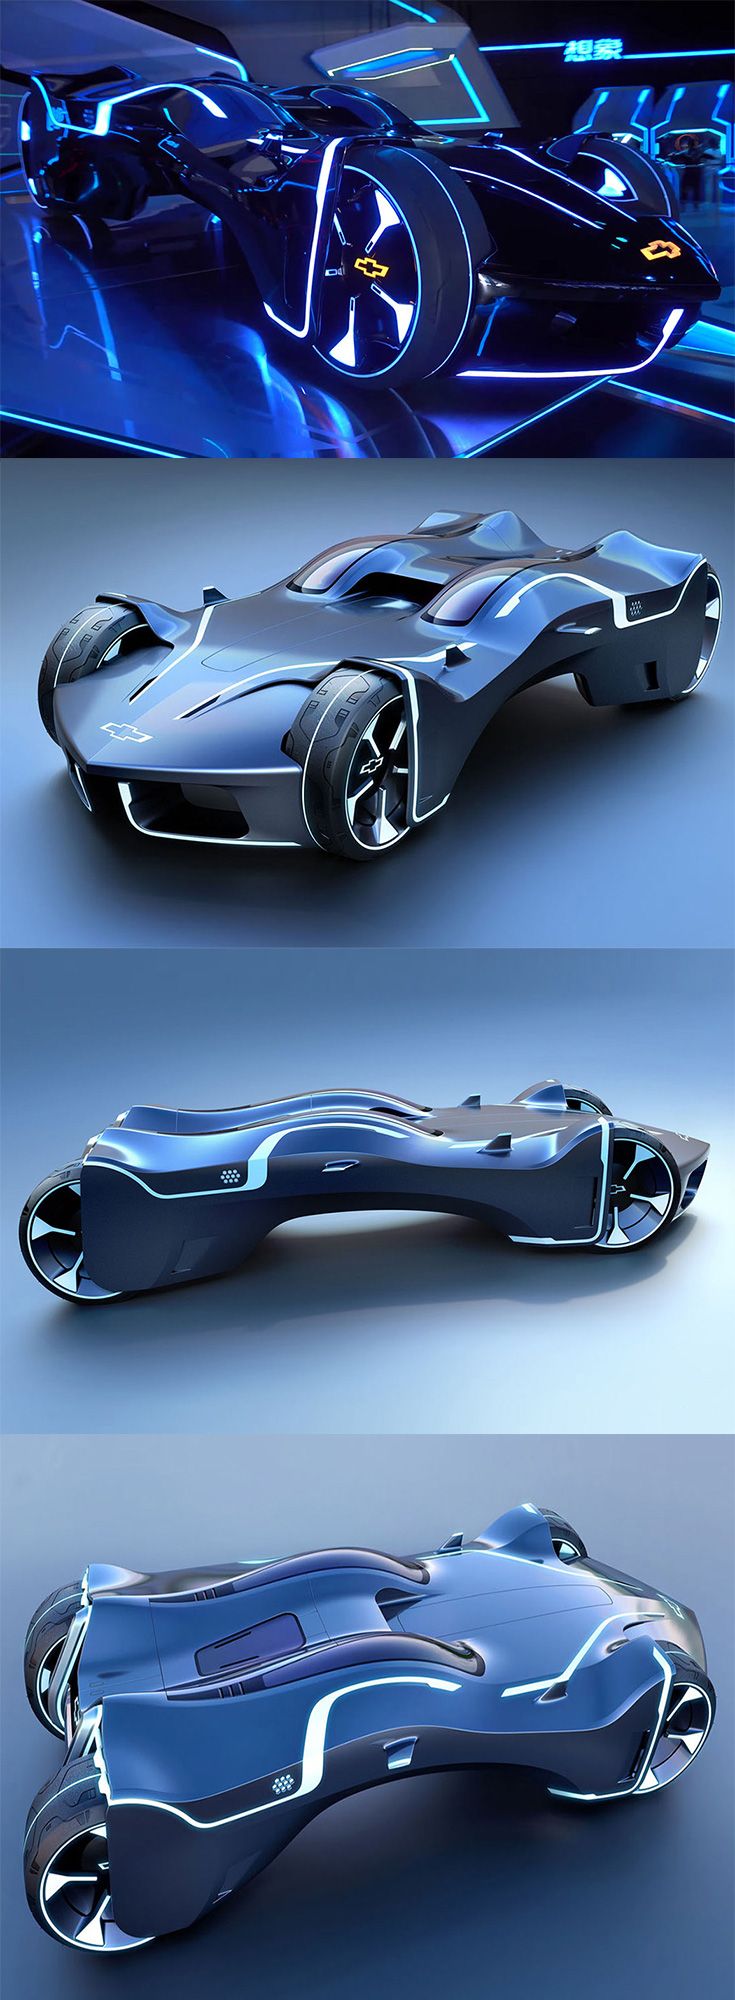 This design is a distillation of the perfect essence of Tron and Chevy in one ma…